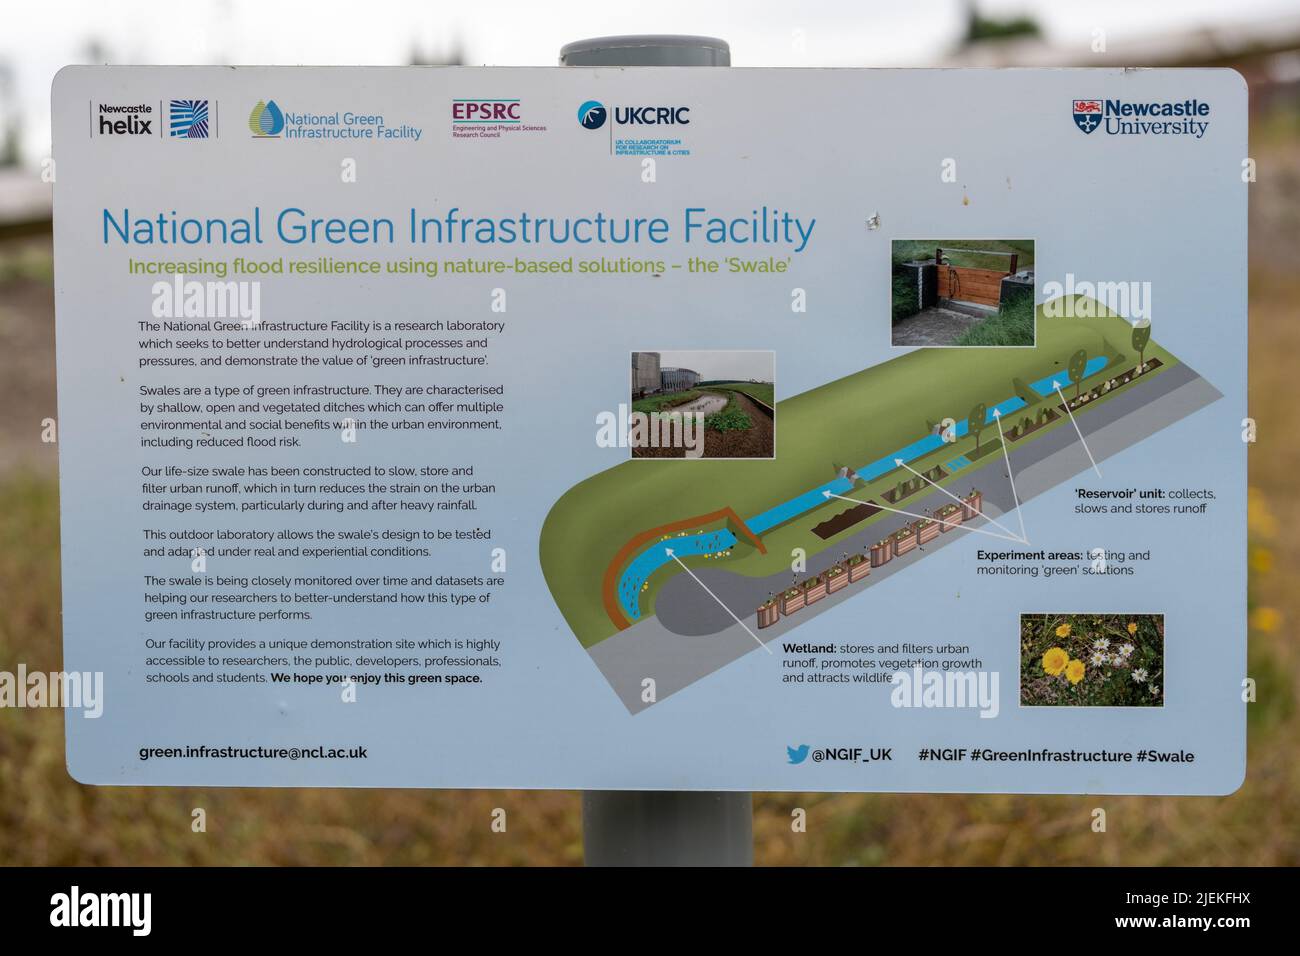 Sign for National Green Infrastructure Facility at the Newcastle Helix science park, including Newcastle University campus, Newcastle upon Tyne, UK. Stock Photo